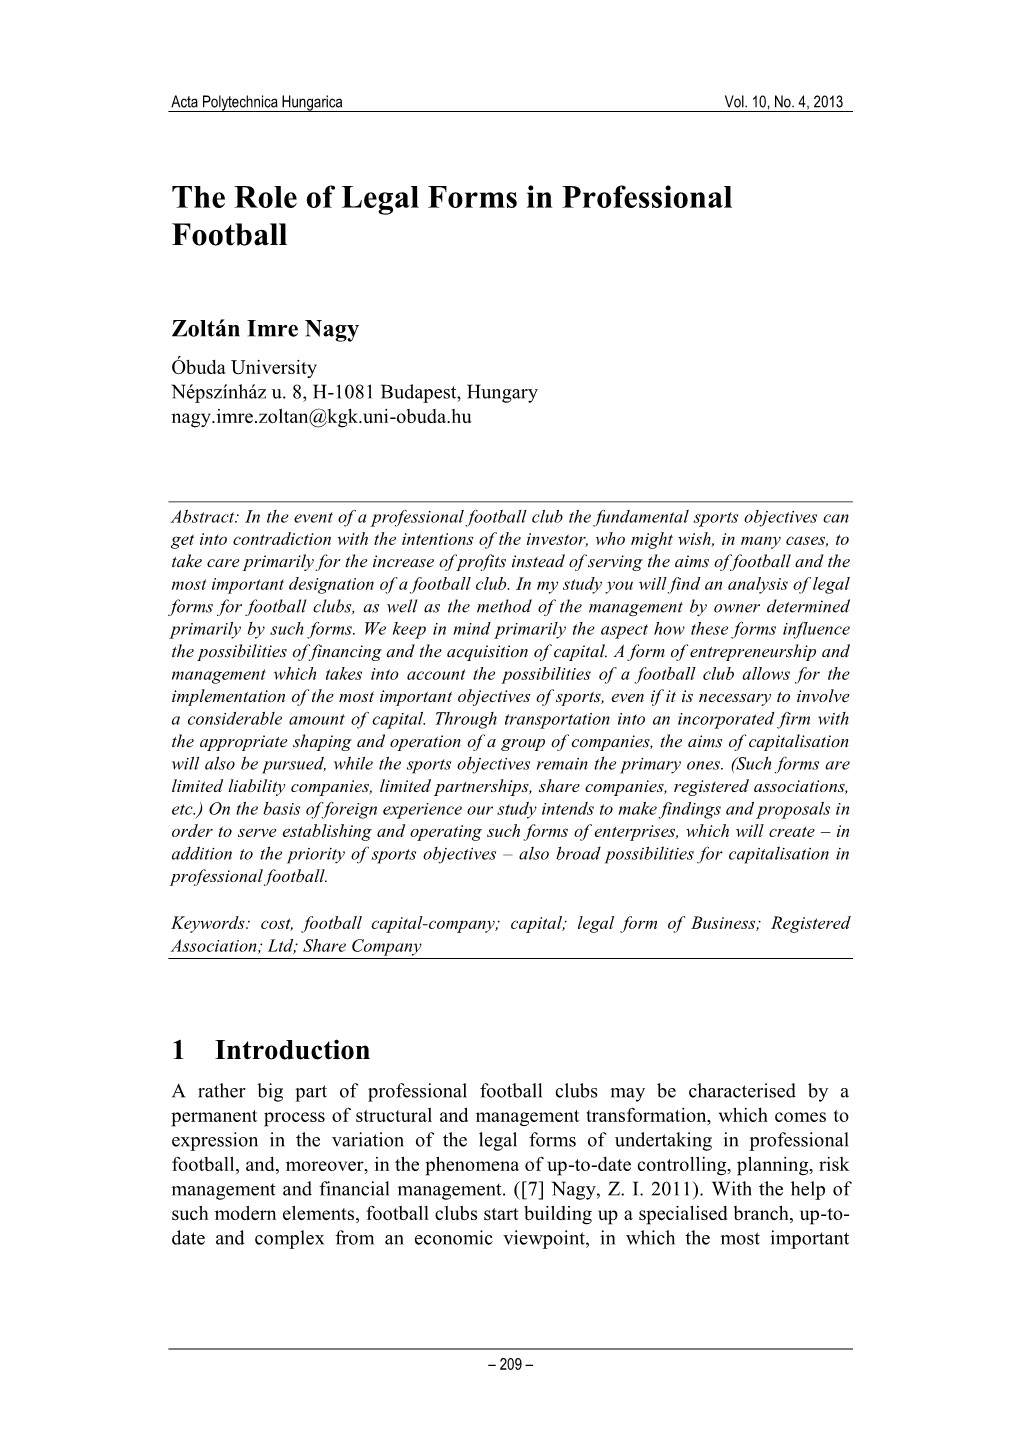 The Role of Legal Forms in Professional Football